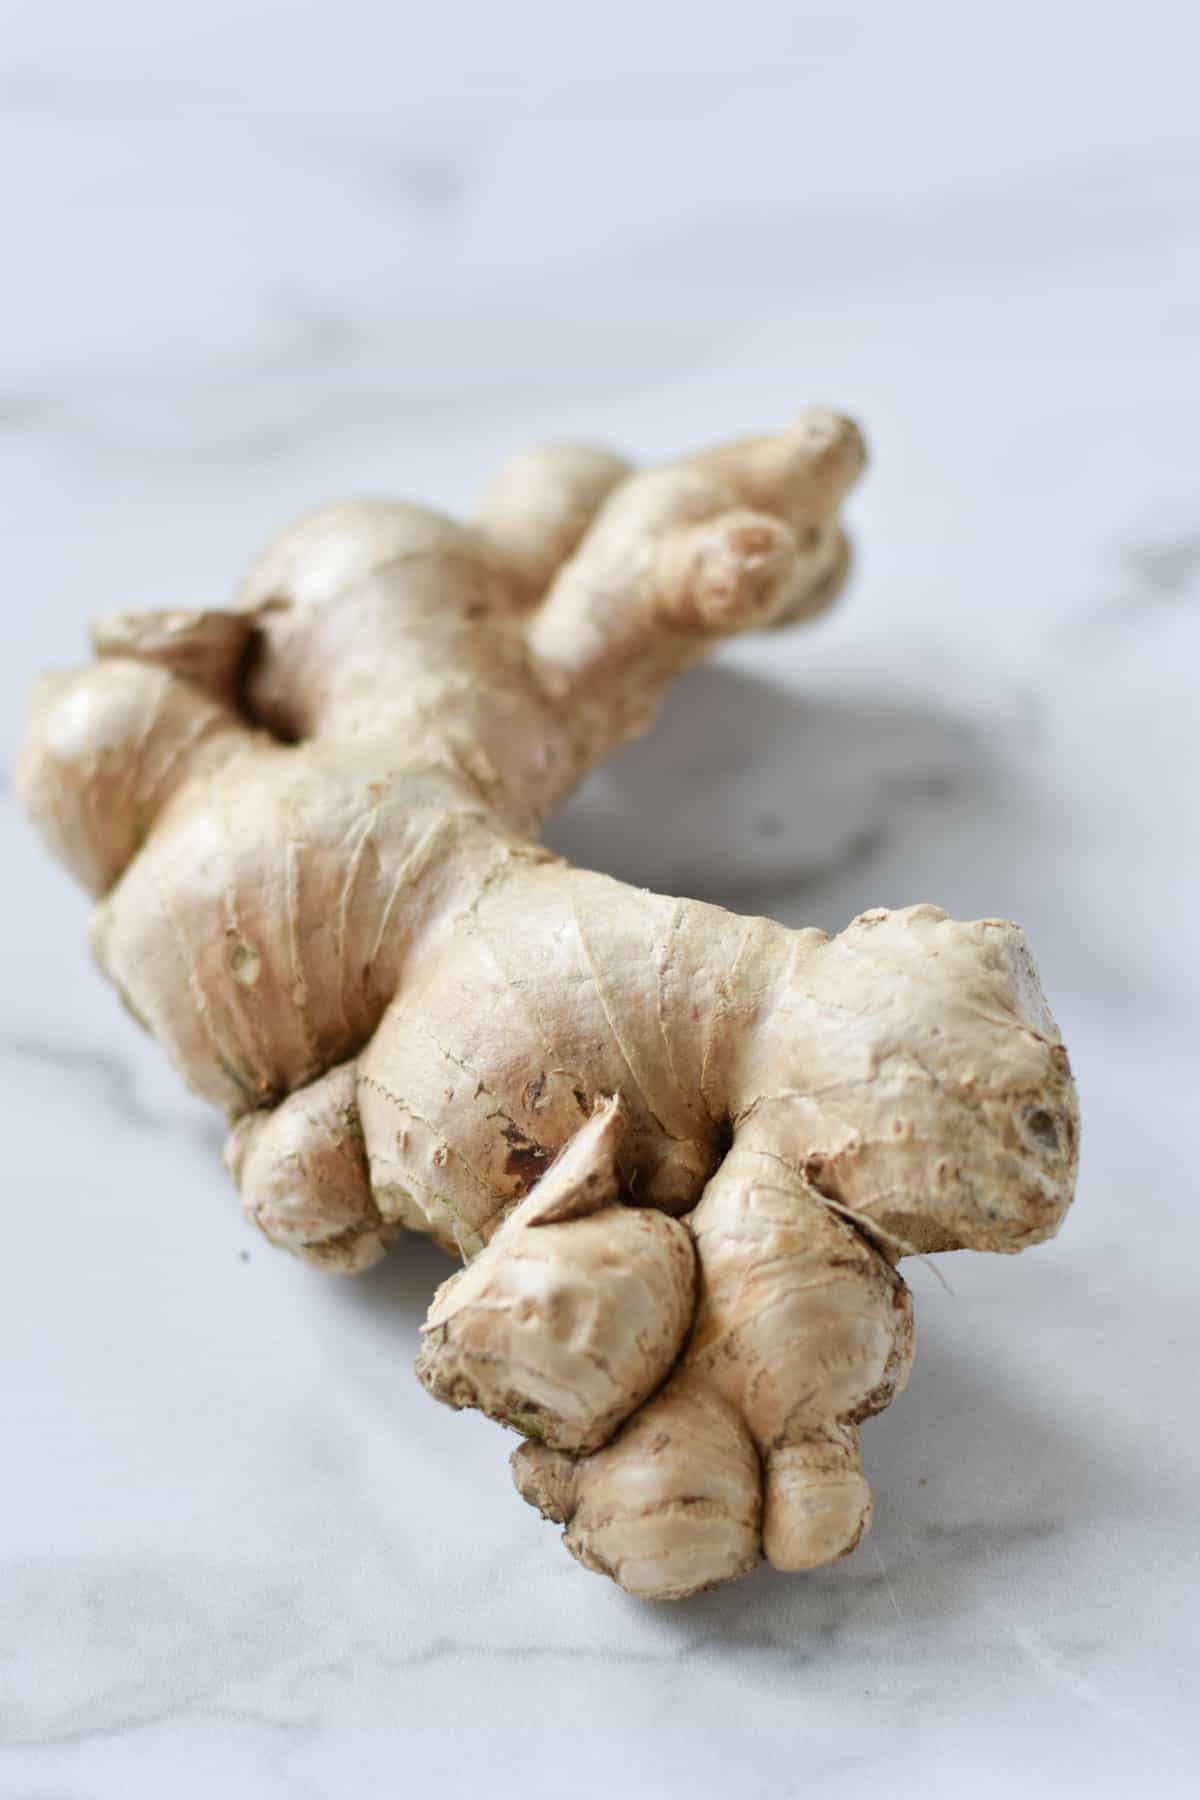 Ginger root on a marble table.